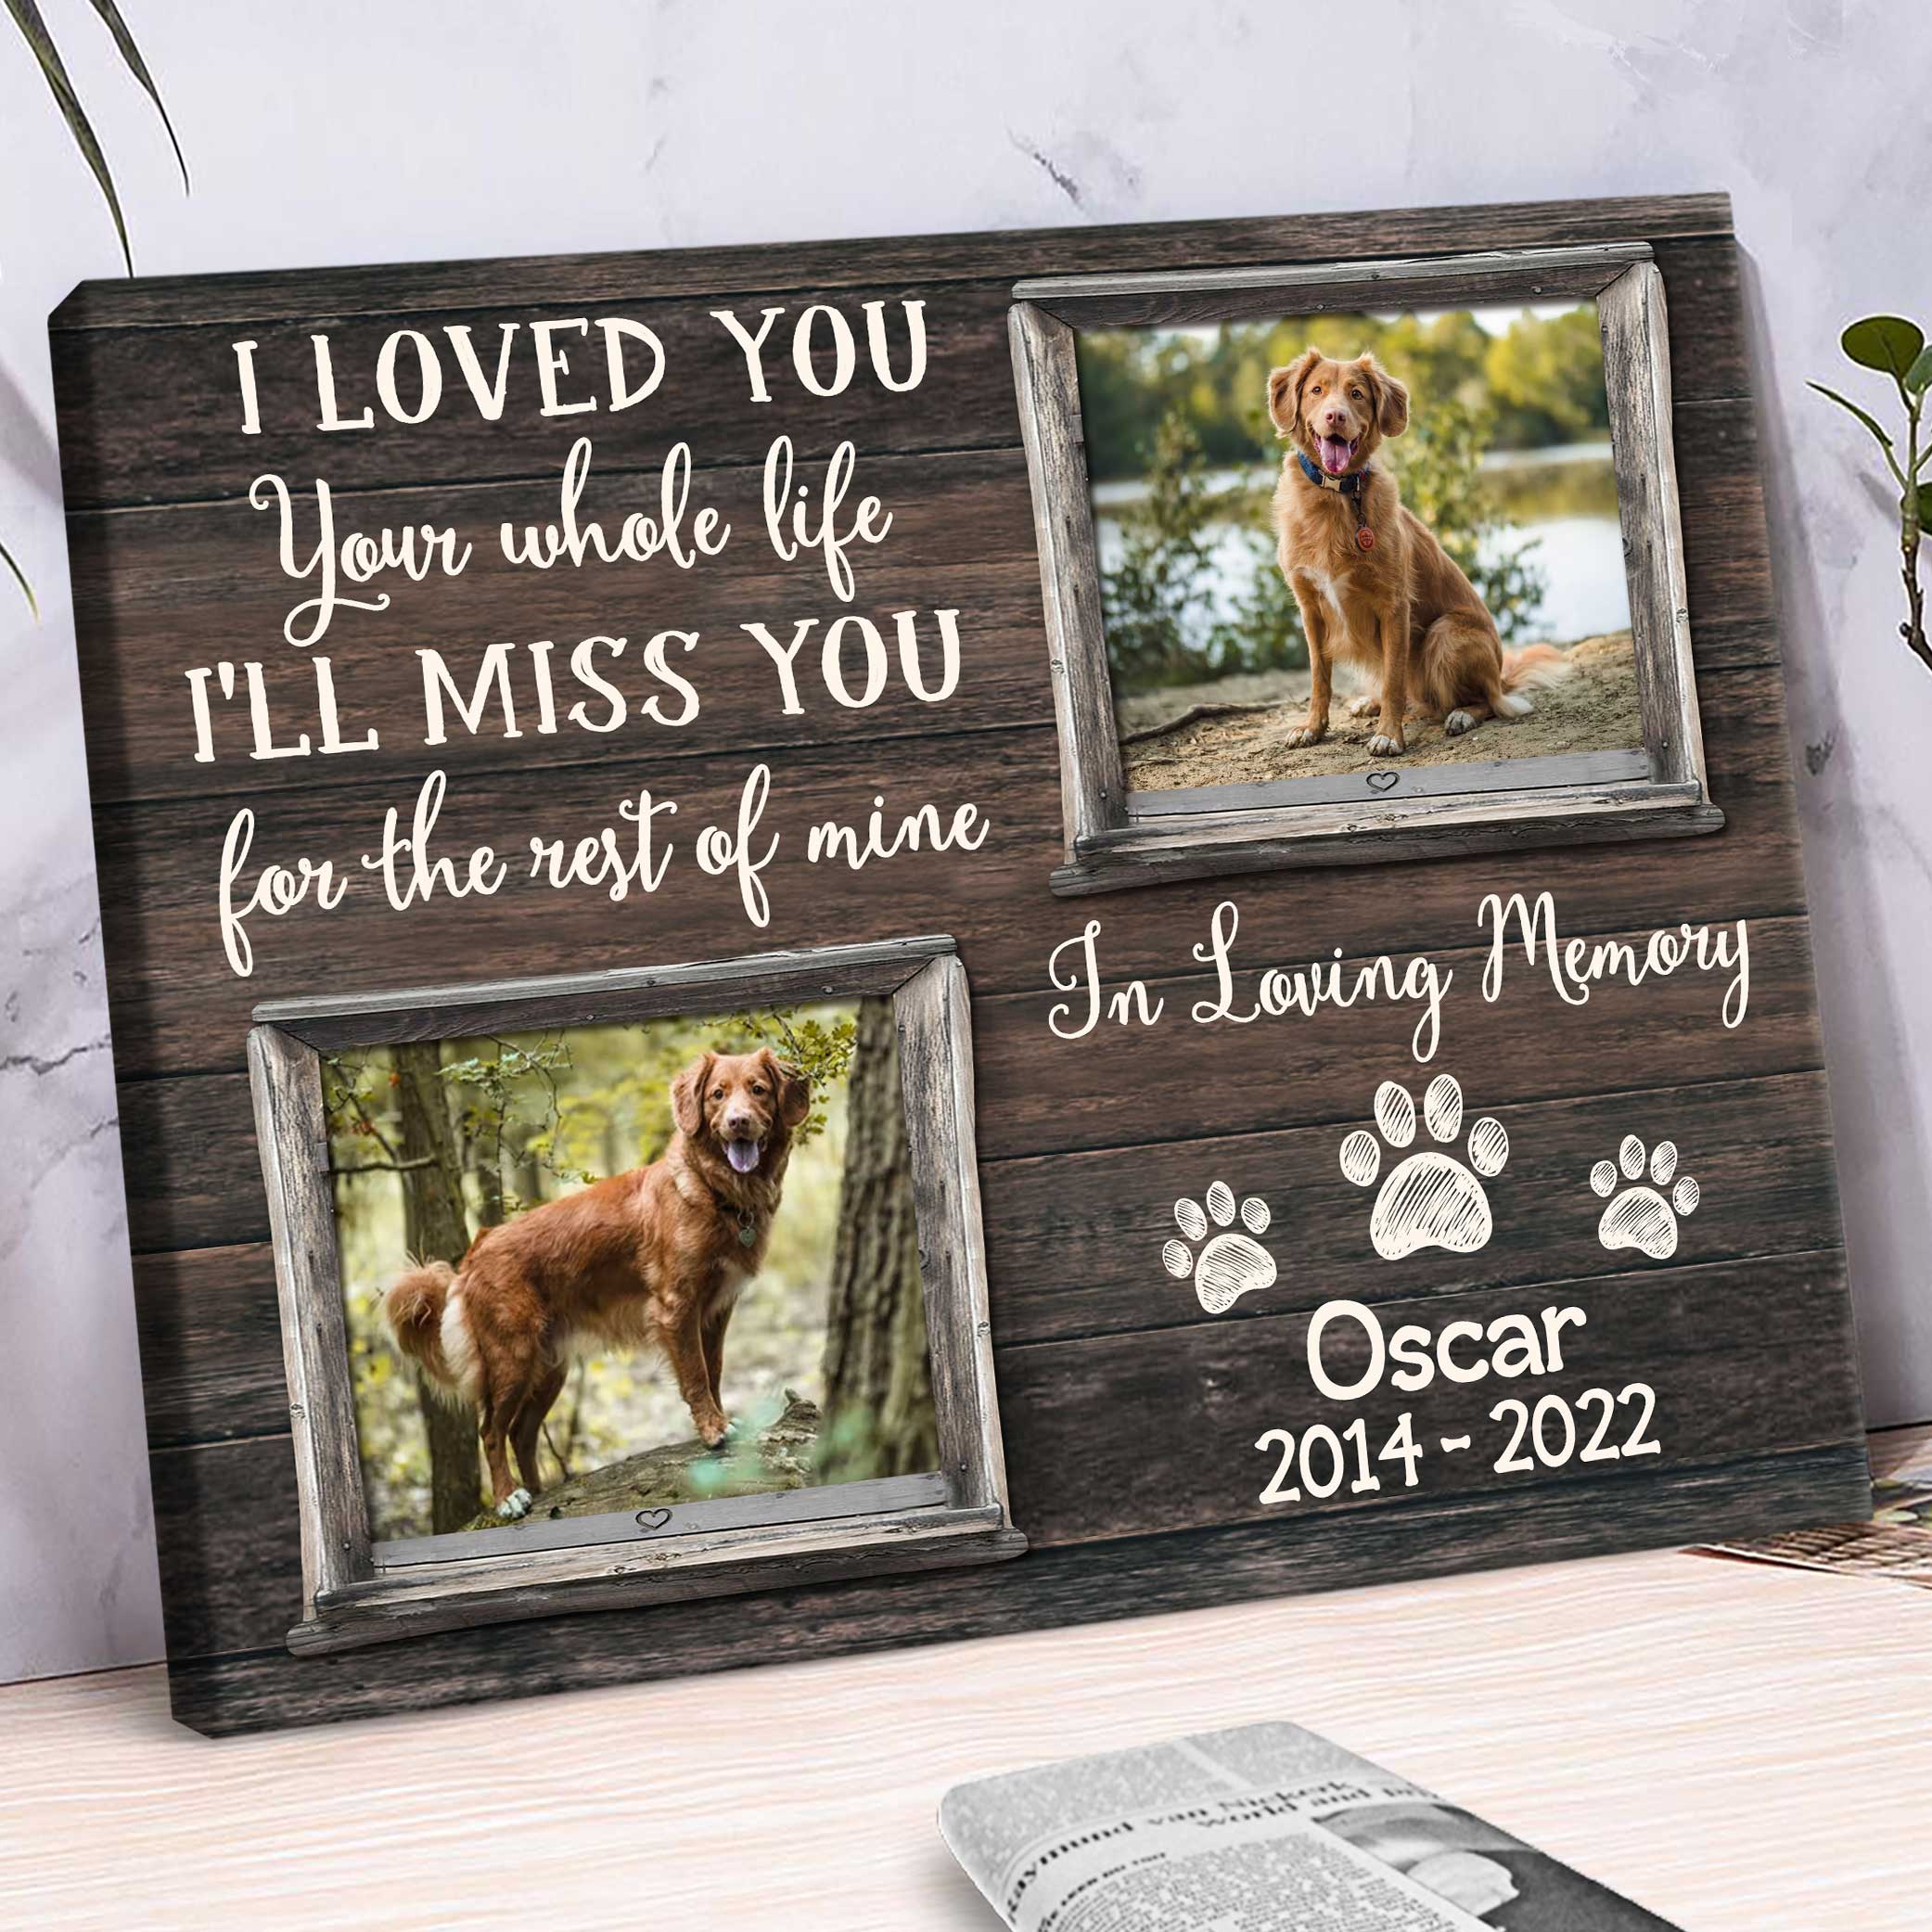 https://benicee.com/wp-content/uploads/2022/09/Personalized-Pet-Memorial-Gifts-Dog-Remembrance-Gift-Cat-Loss-Gift-Pet-Loss-Frame-3-2.jpg